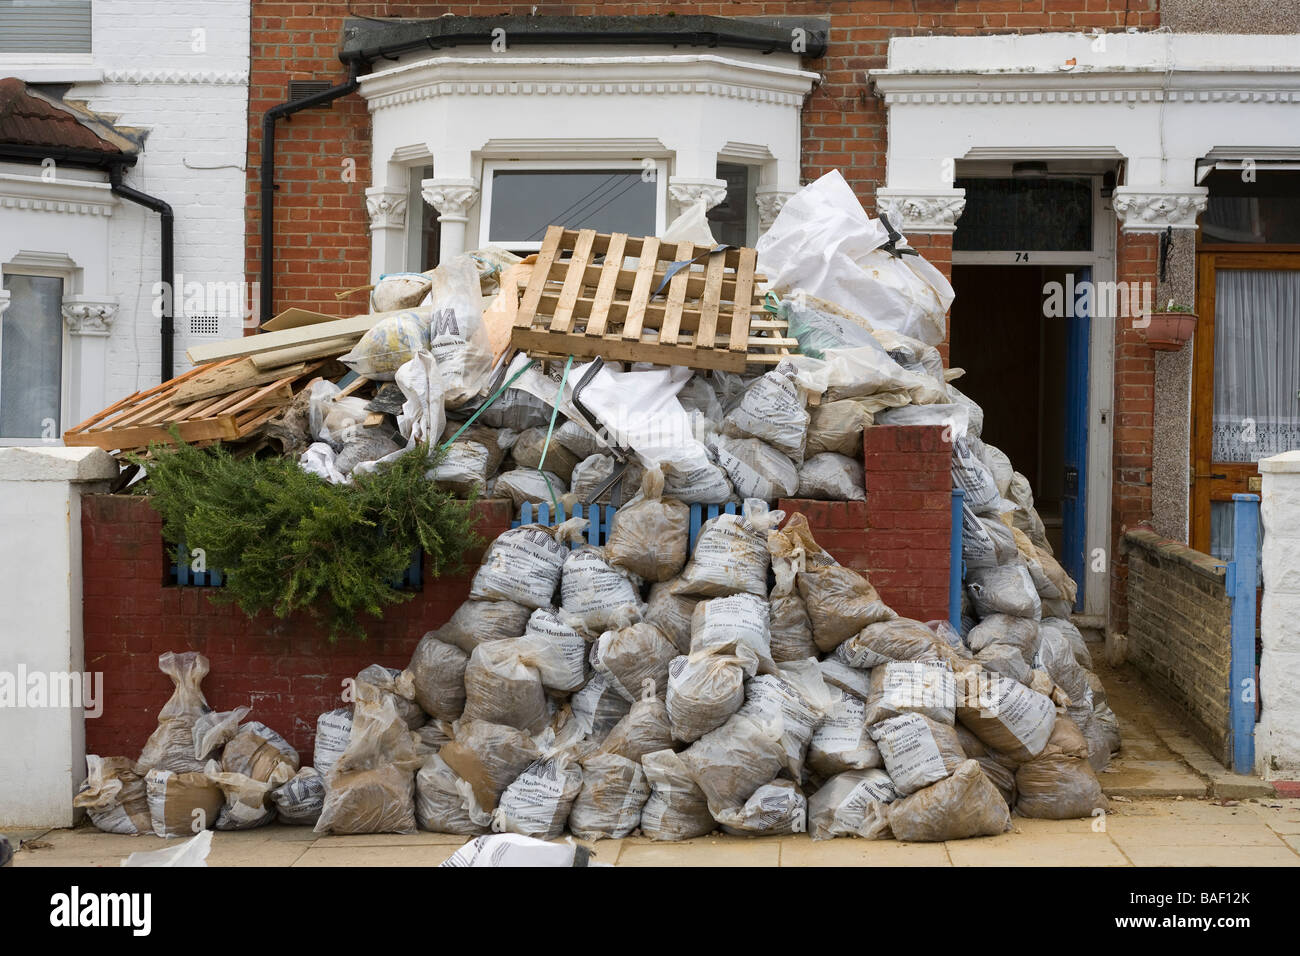 Bagged up builders rubble in sacks outside a house renovation project in south london Stock Photo